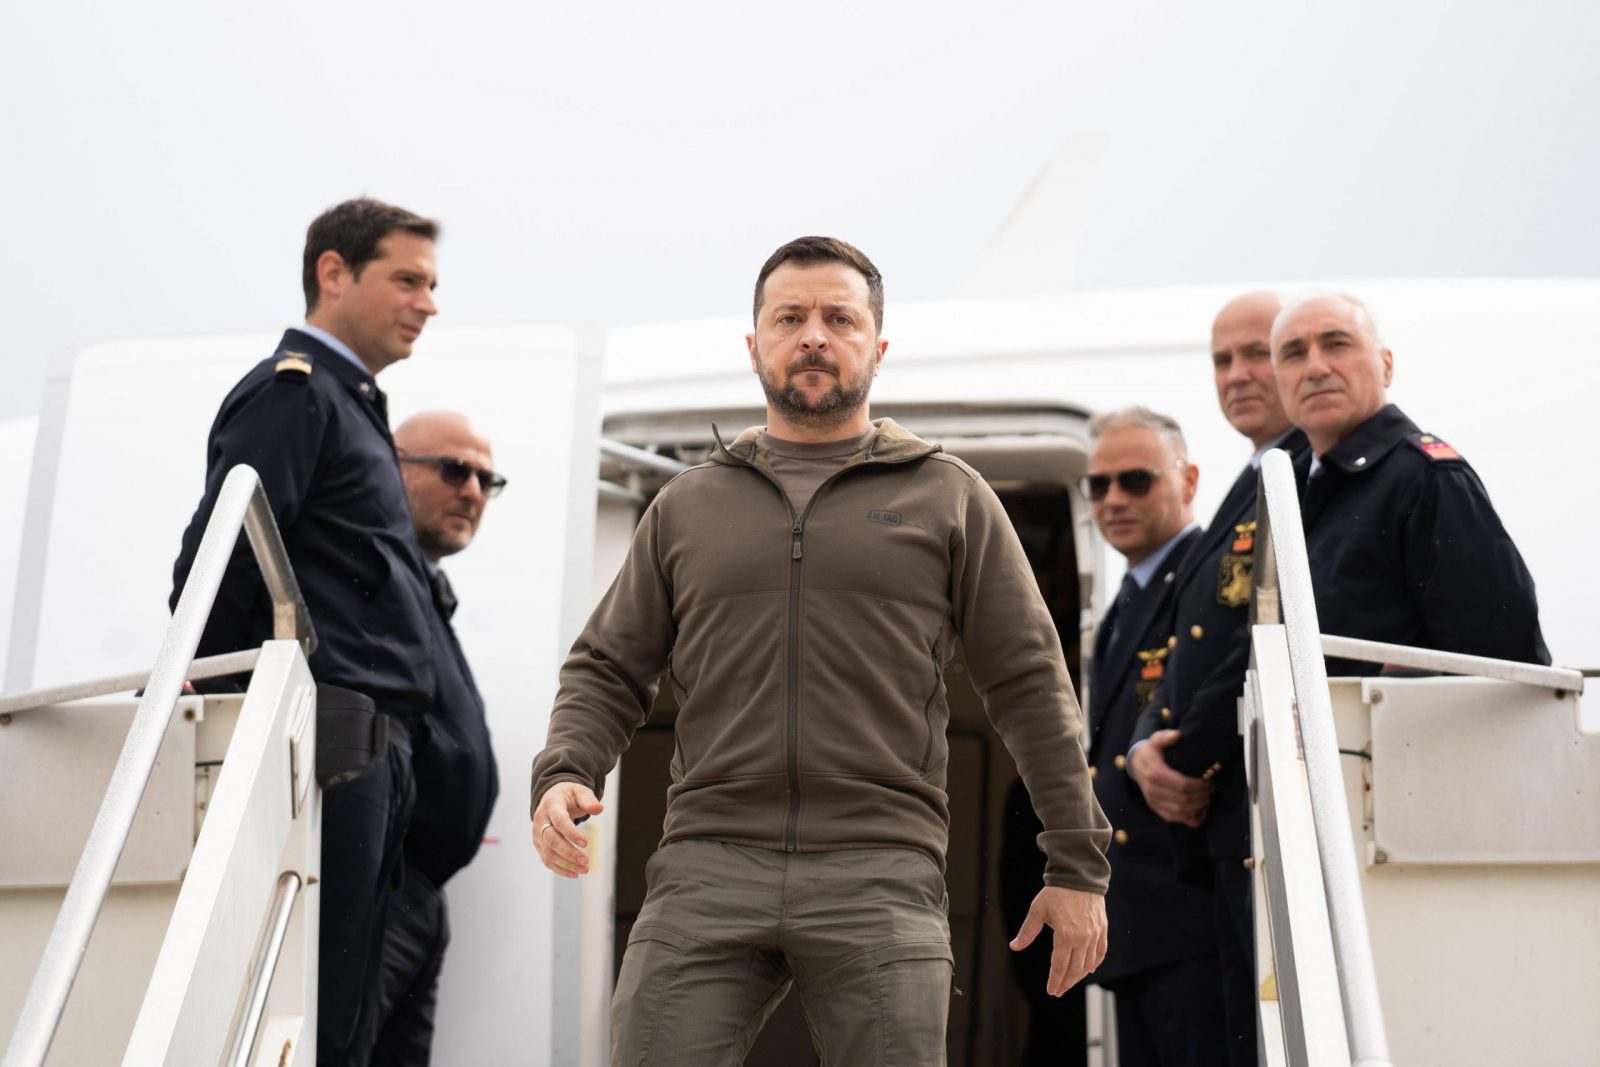 epa10624434 Ukrainian President Volodymyr Zelensky (C) disembarks from a plane at Ciampino Airport in Rome, Italy, 13 May 2023. It is the first time for Zelensky to come to Italy since the start of the Russian invasion of Ukraine in February 2022. He is scheduled to meet with the Italian President and Pope Francis.  EPA/TELENEWS